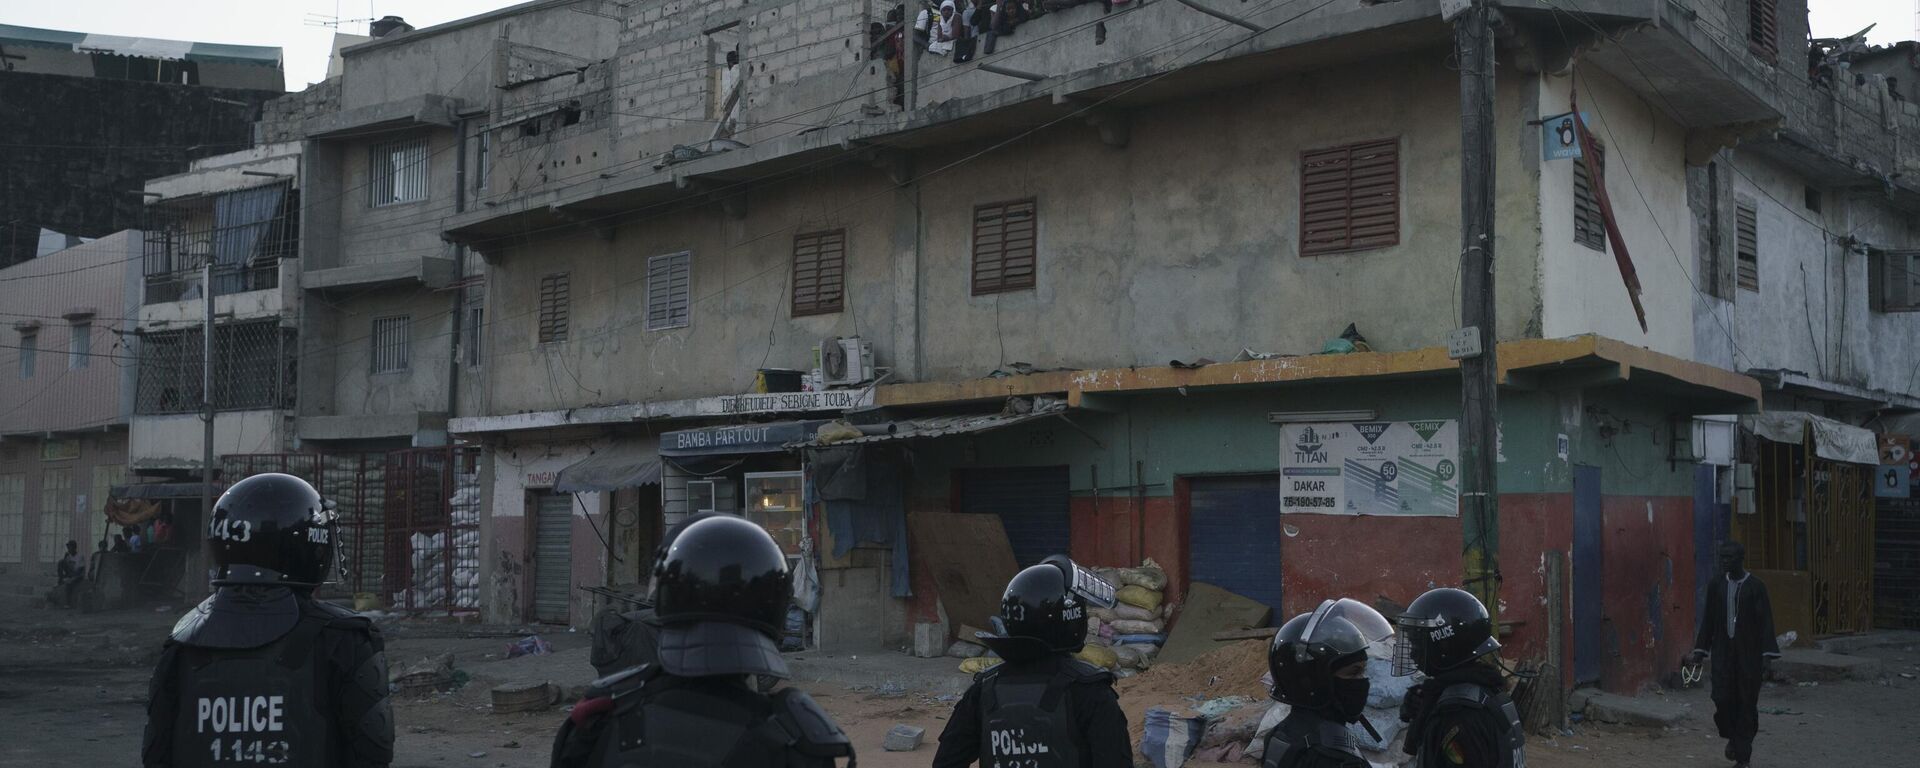 Police in riot gear stand guard during clashes with demonstrators in Dakar, Senegal, Saturday, June 3, 2023. The clashes first broke out, later this week, after opposition leader Ousmane Sonko was convicted of corrupting youth and sentenced to two years in prison. - Sputnik Africa, 1920, 08.06.2023